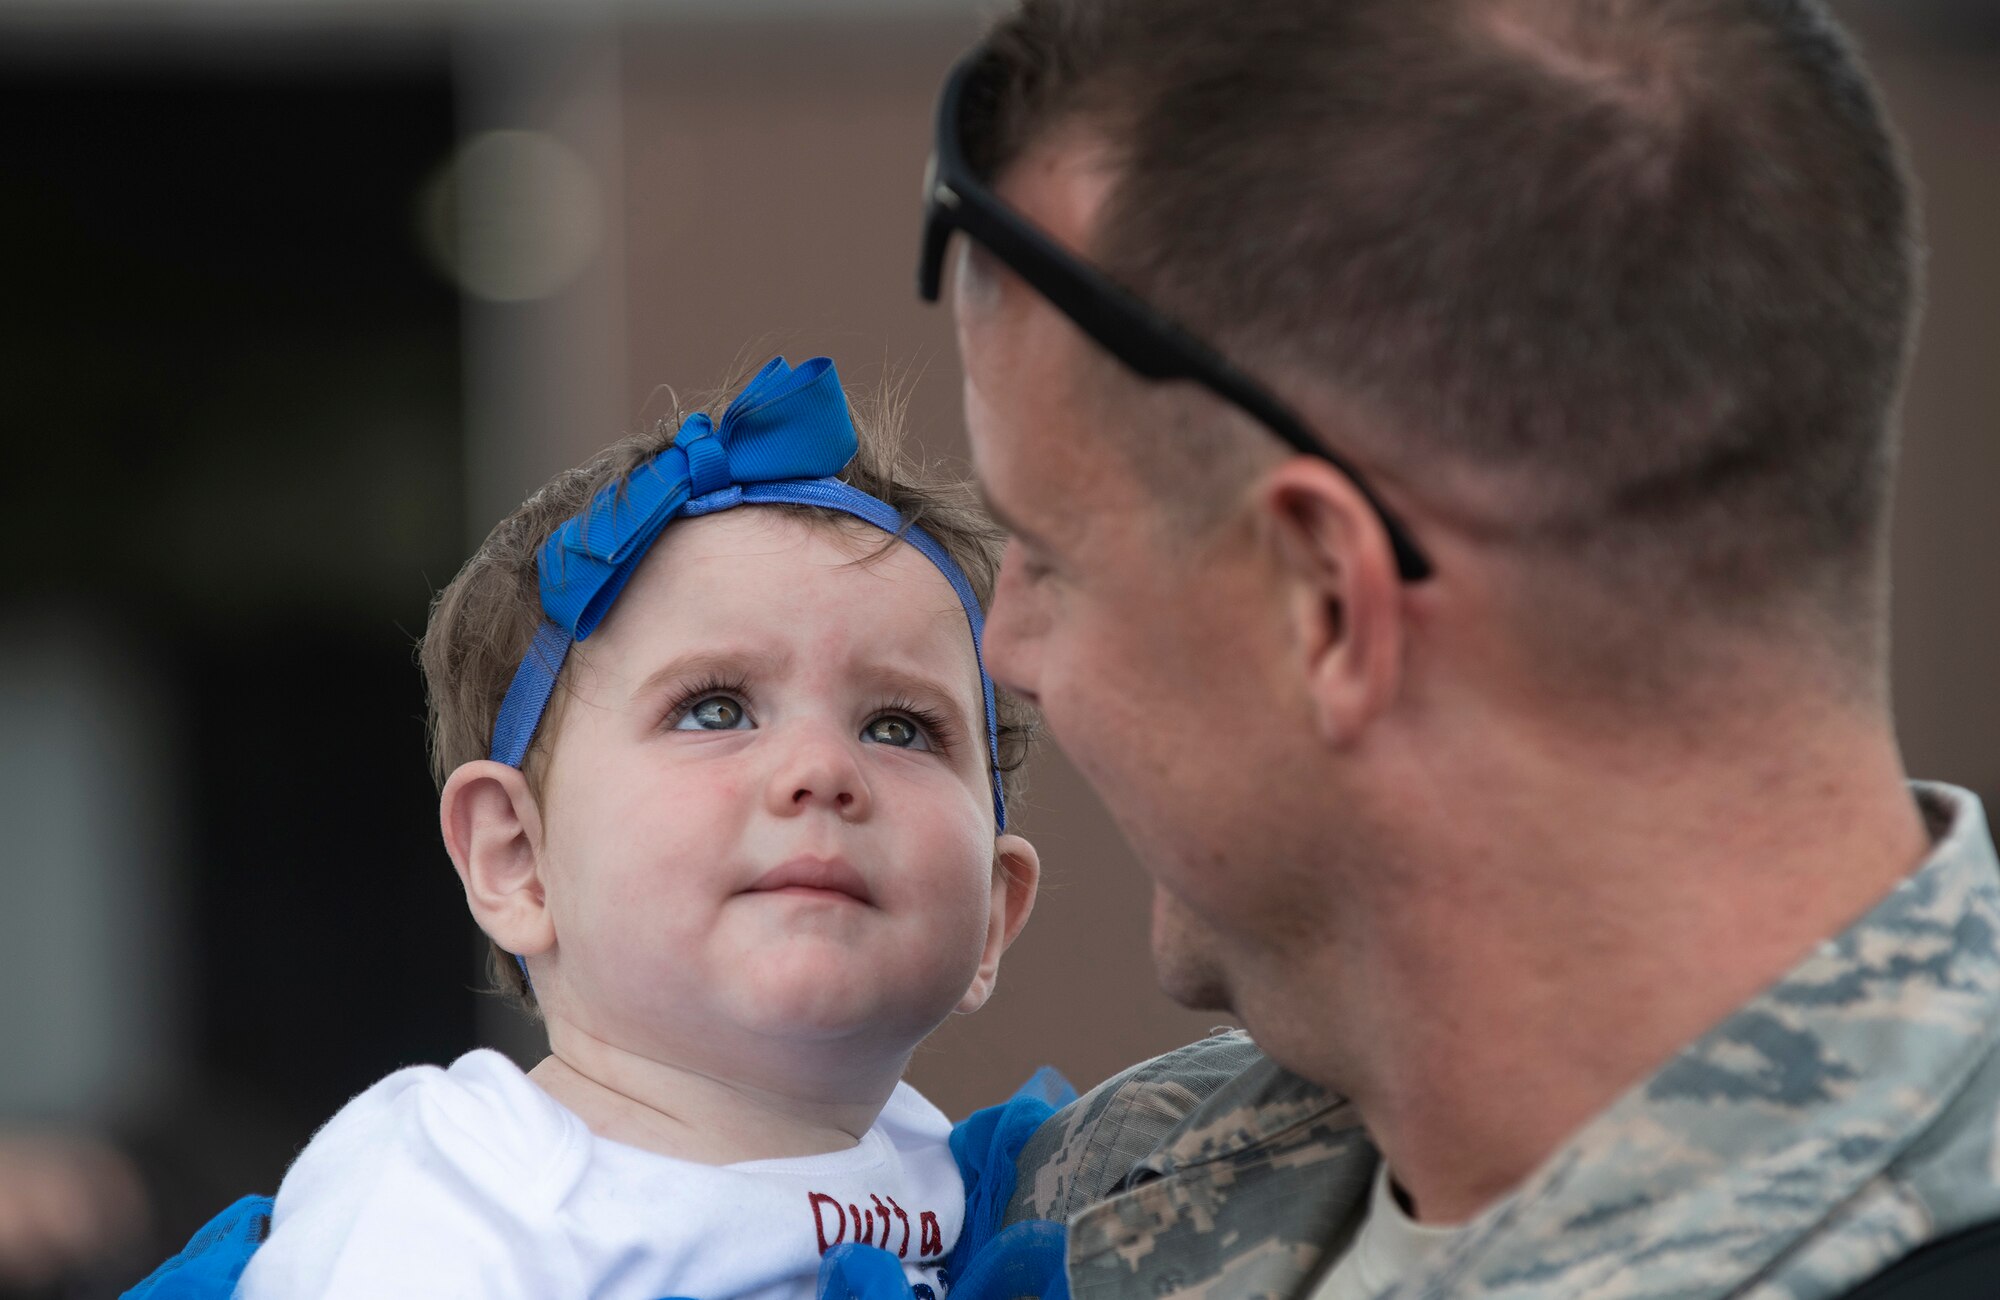 A U.S. Air Force member from the 48th Fighter Wing reunites with his family at Royal Air Force Lakenheath, England, July 12, 2019. Members of the 493rd Fighter Squadron and 748th Aircraft Maintenance Squadron were deployed to an undisclosed location for six months. (U.S. Air Force photo by Senior Airman Malcolm Mayfield)